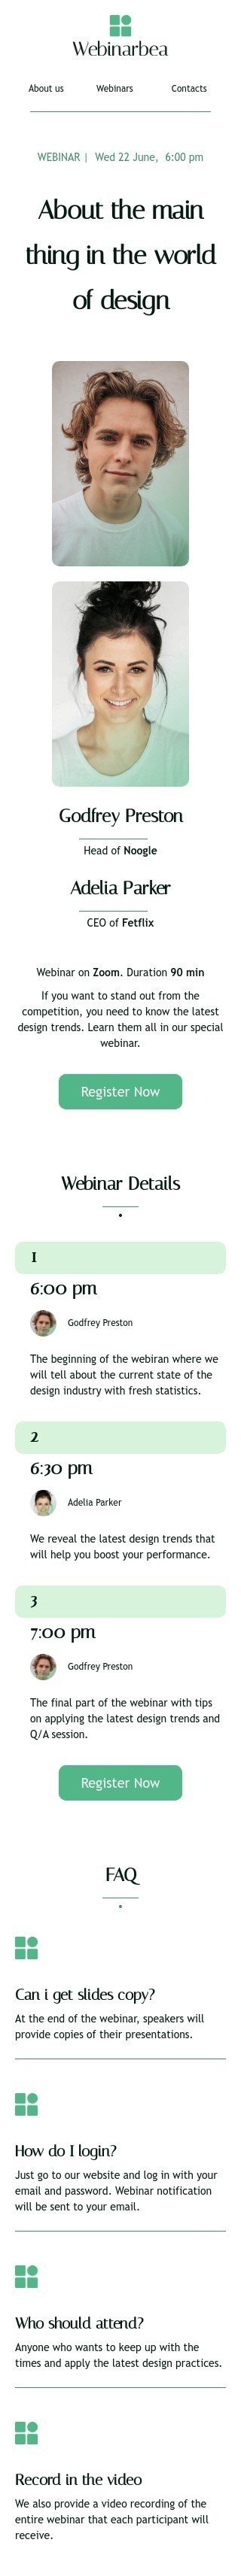 Promo email template «World of design» for webinars industry mobile view